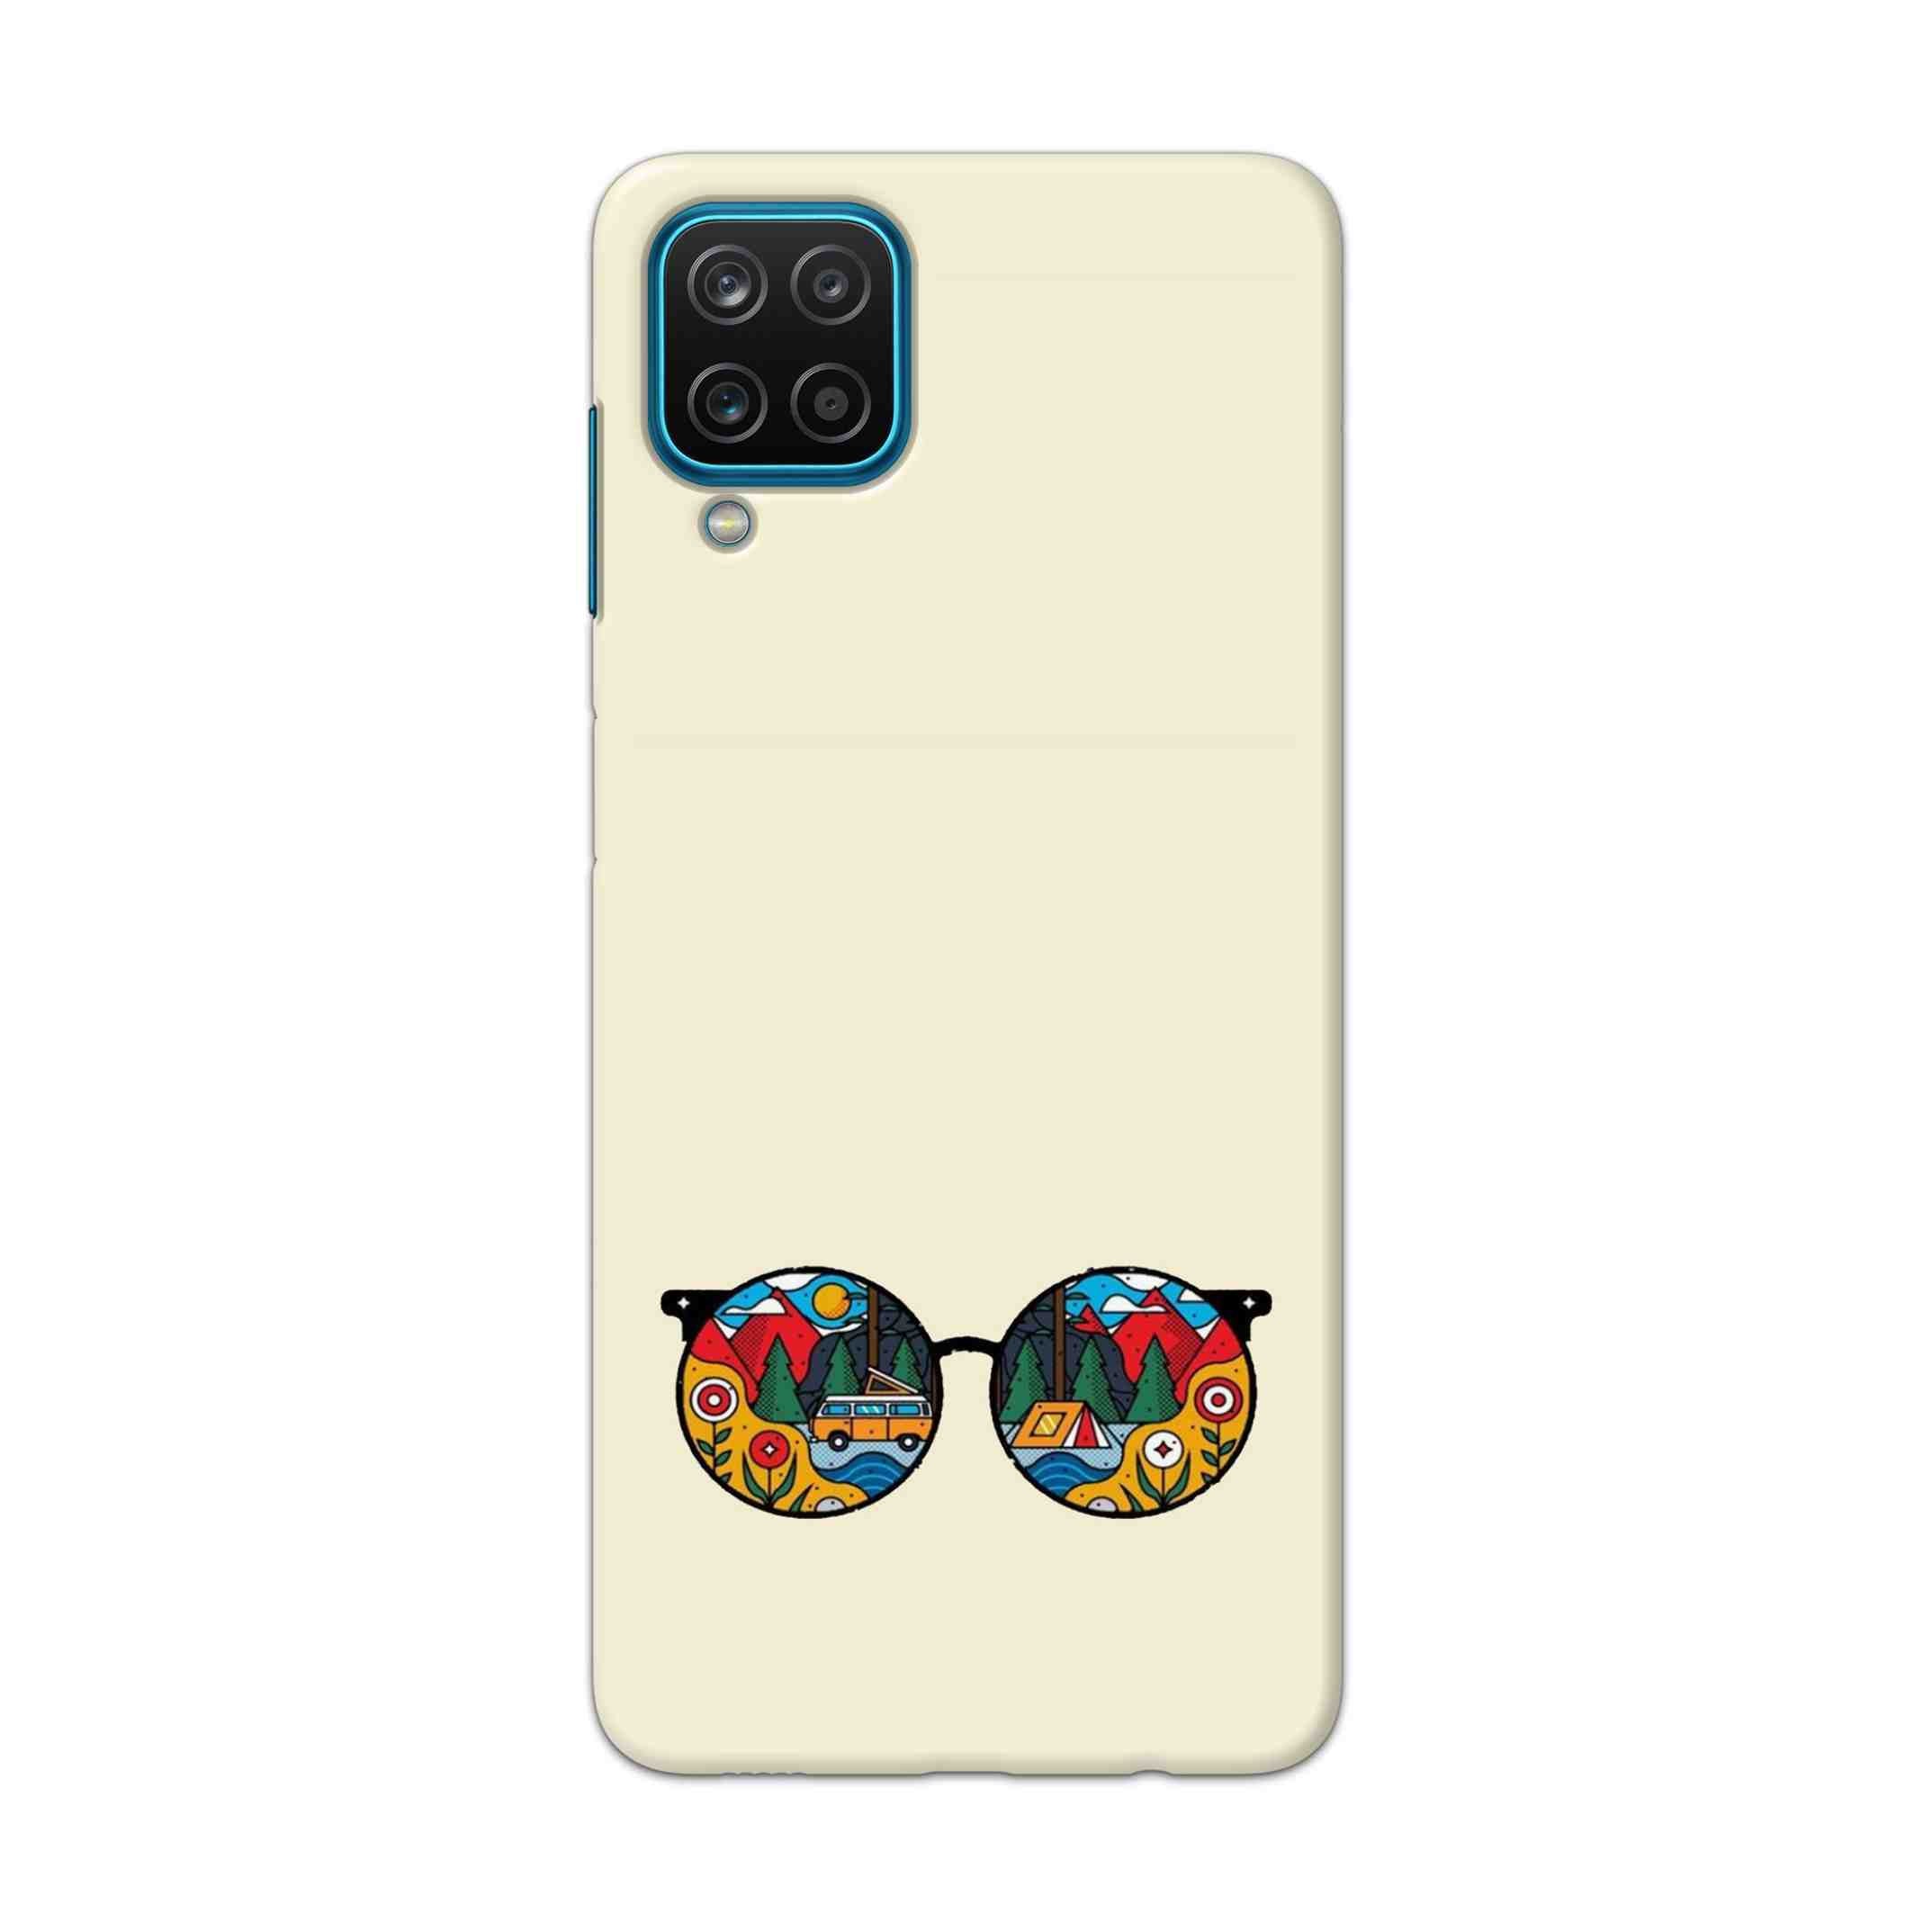 Buy Rainbow Sunglasses Hard Back Mobile Phone Case Cover For Samsung Galaxy A12 Online